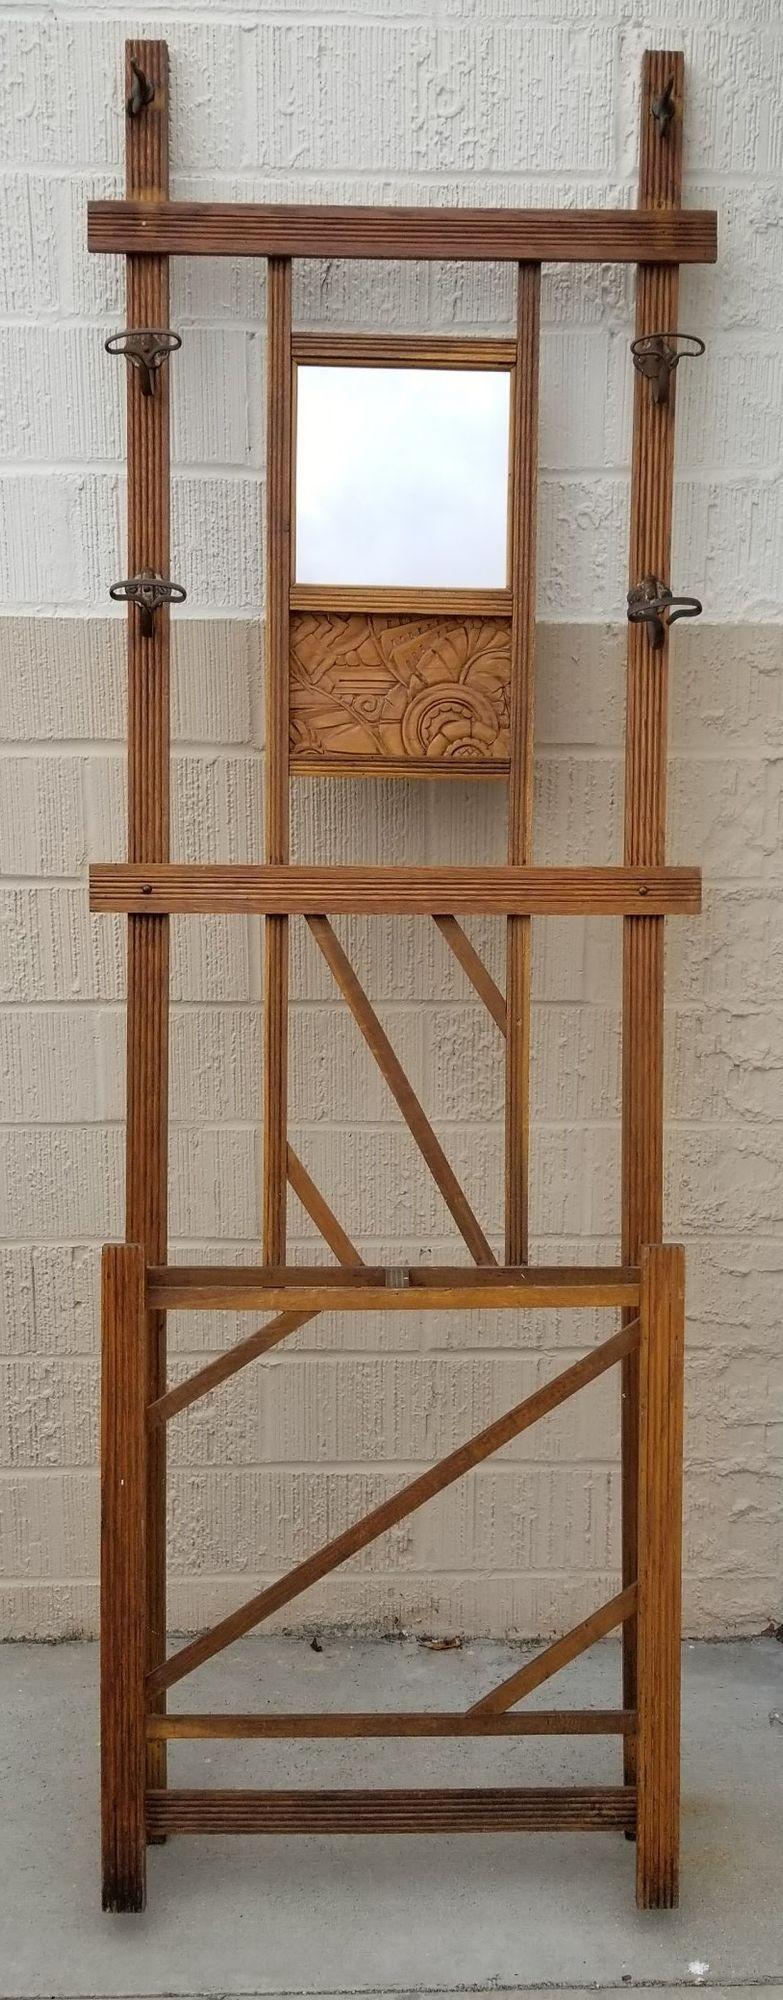 American Art Deco Carved Rack Hall Tree with Mirror For Sale